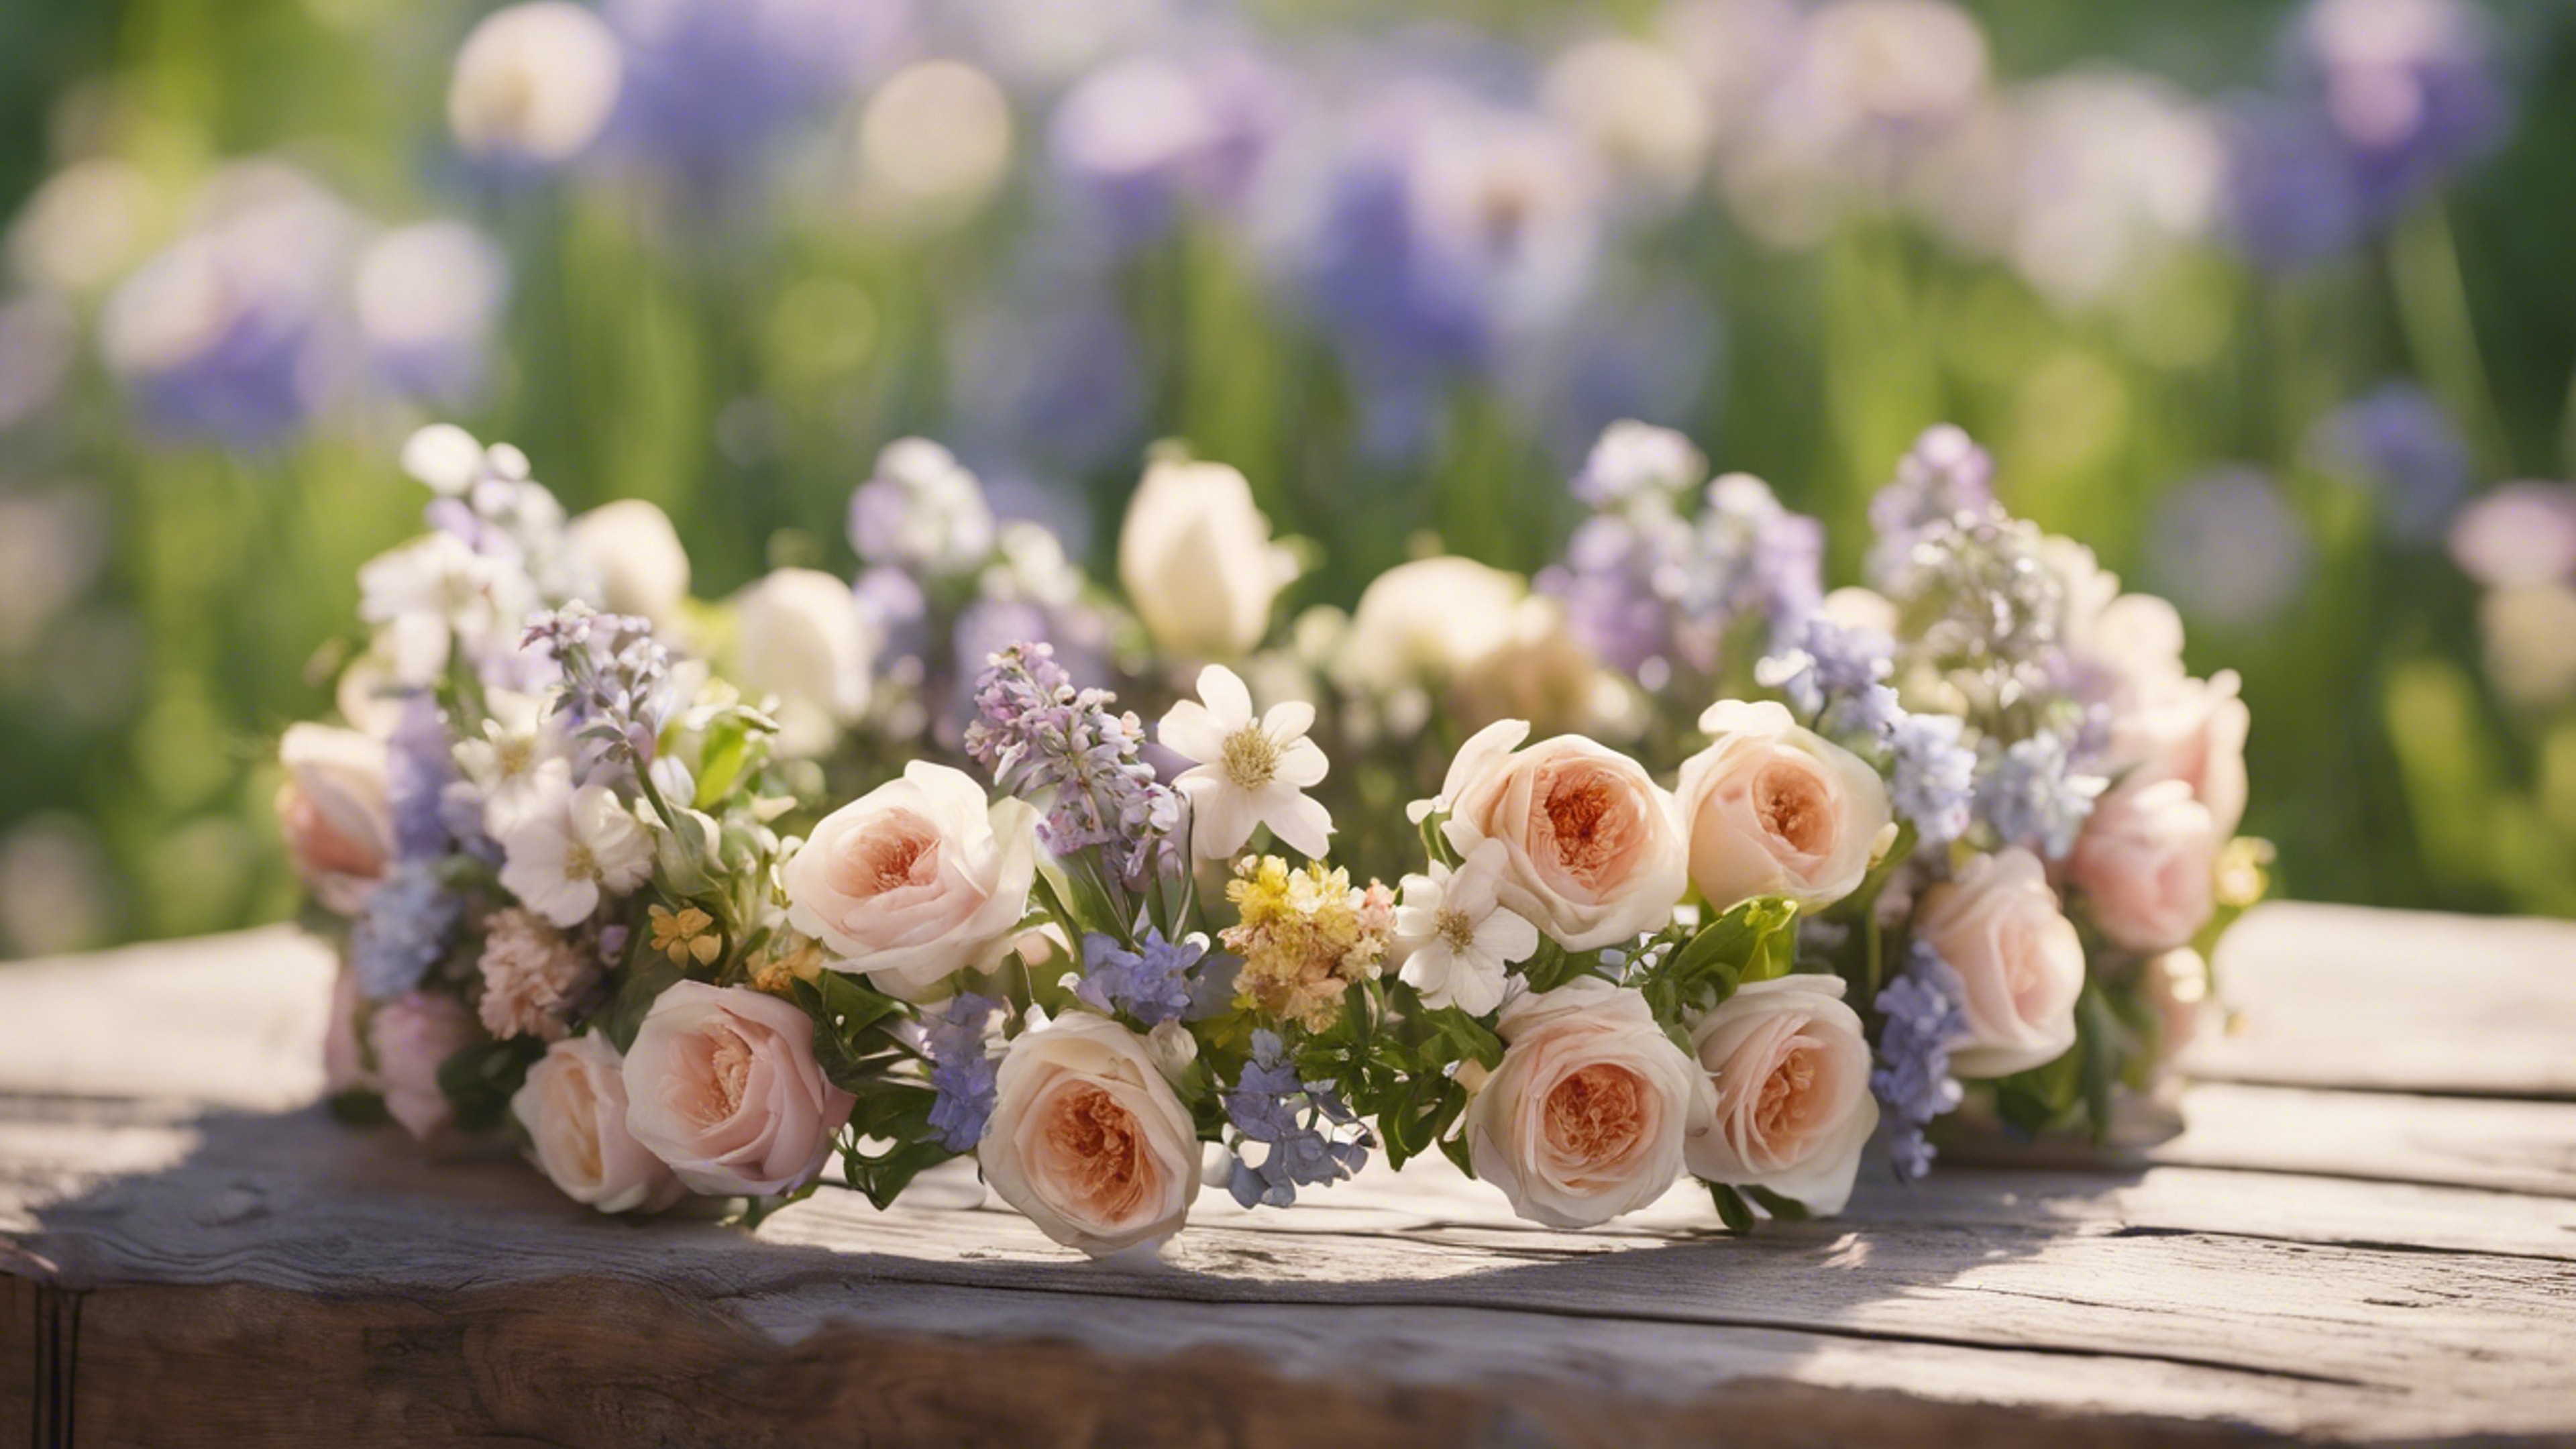 A crown made of fresh spring flowers on a wooden table outdoors. Шпалери[d5115d6a32bf47389ae3]